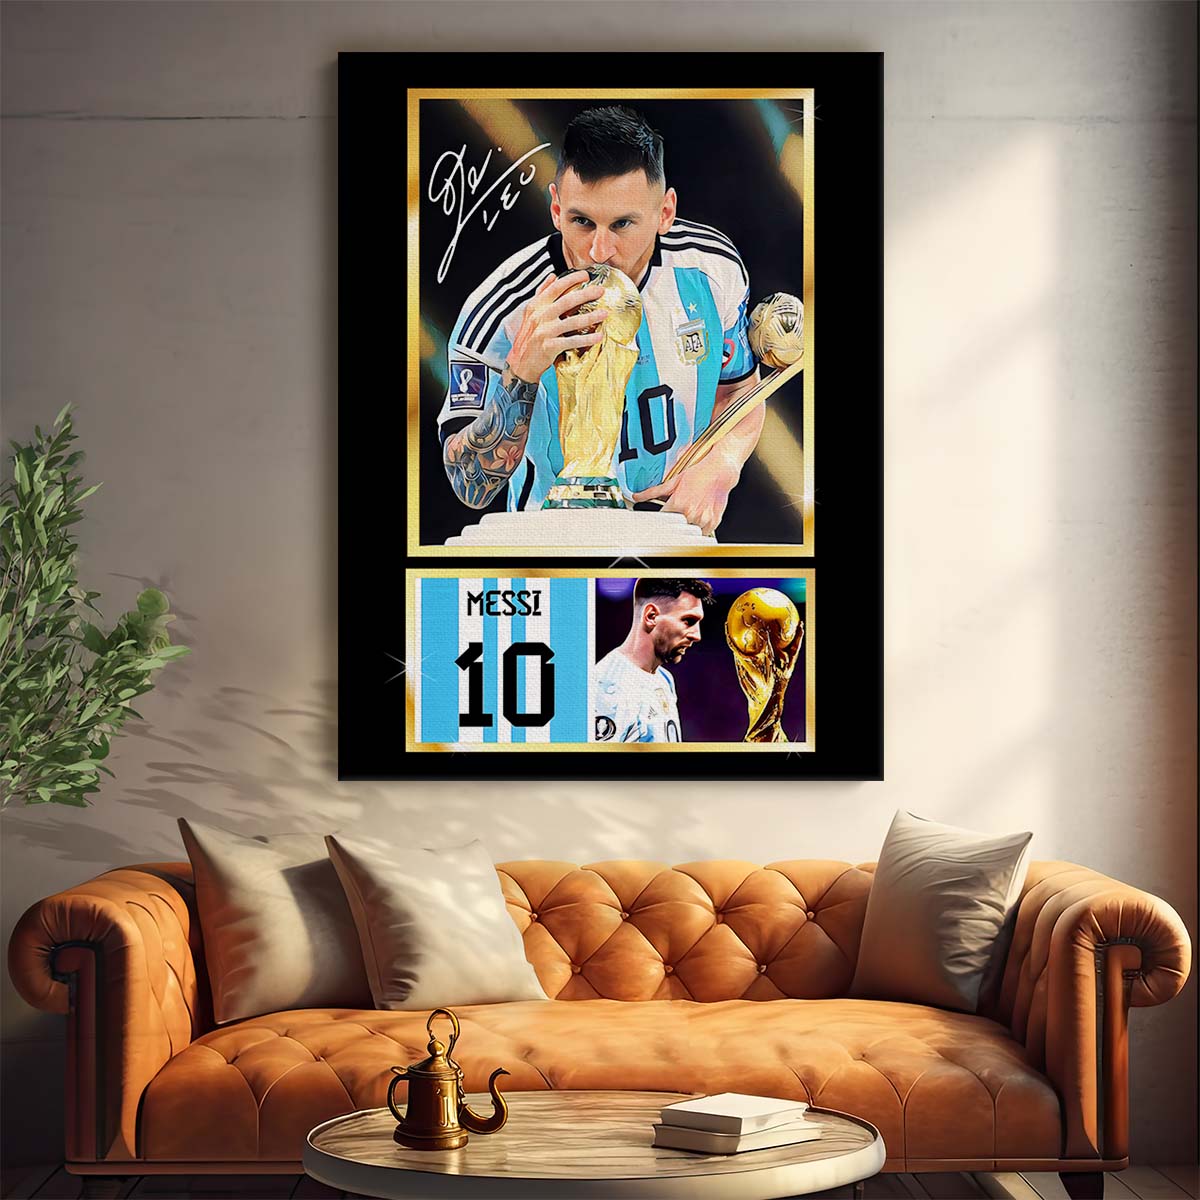 Leo Messi World Cup Victory Wall Art by Luxuriance Designs. Made in USA.